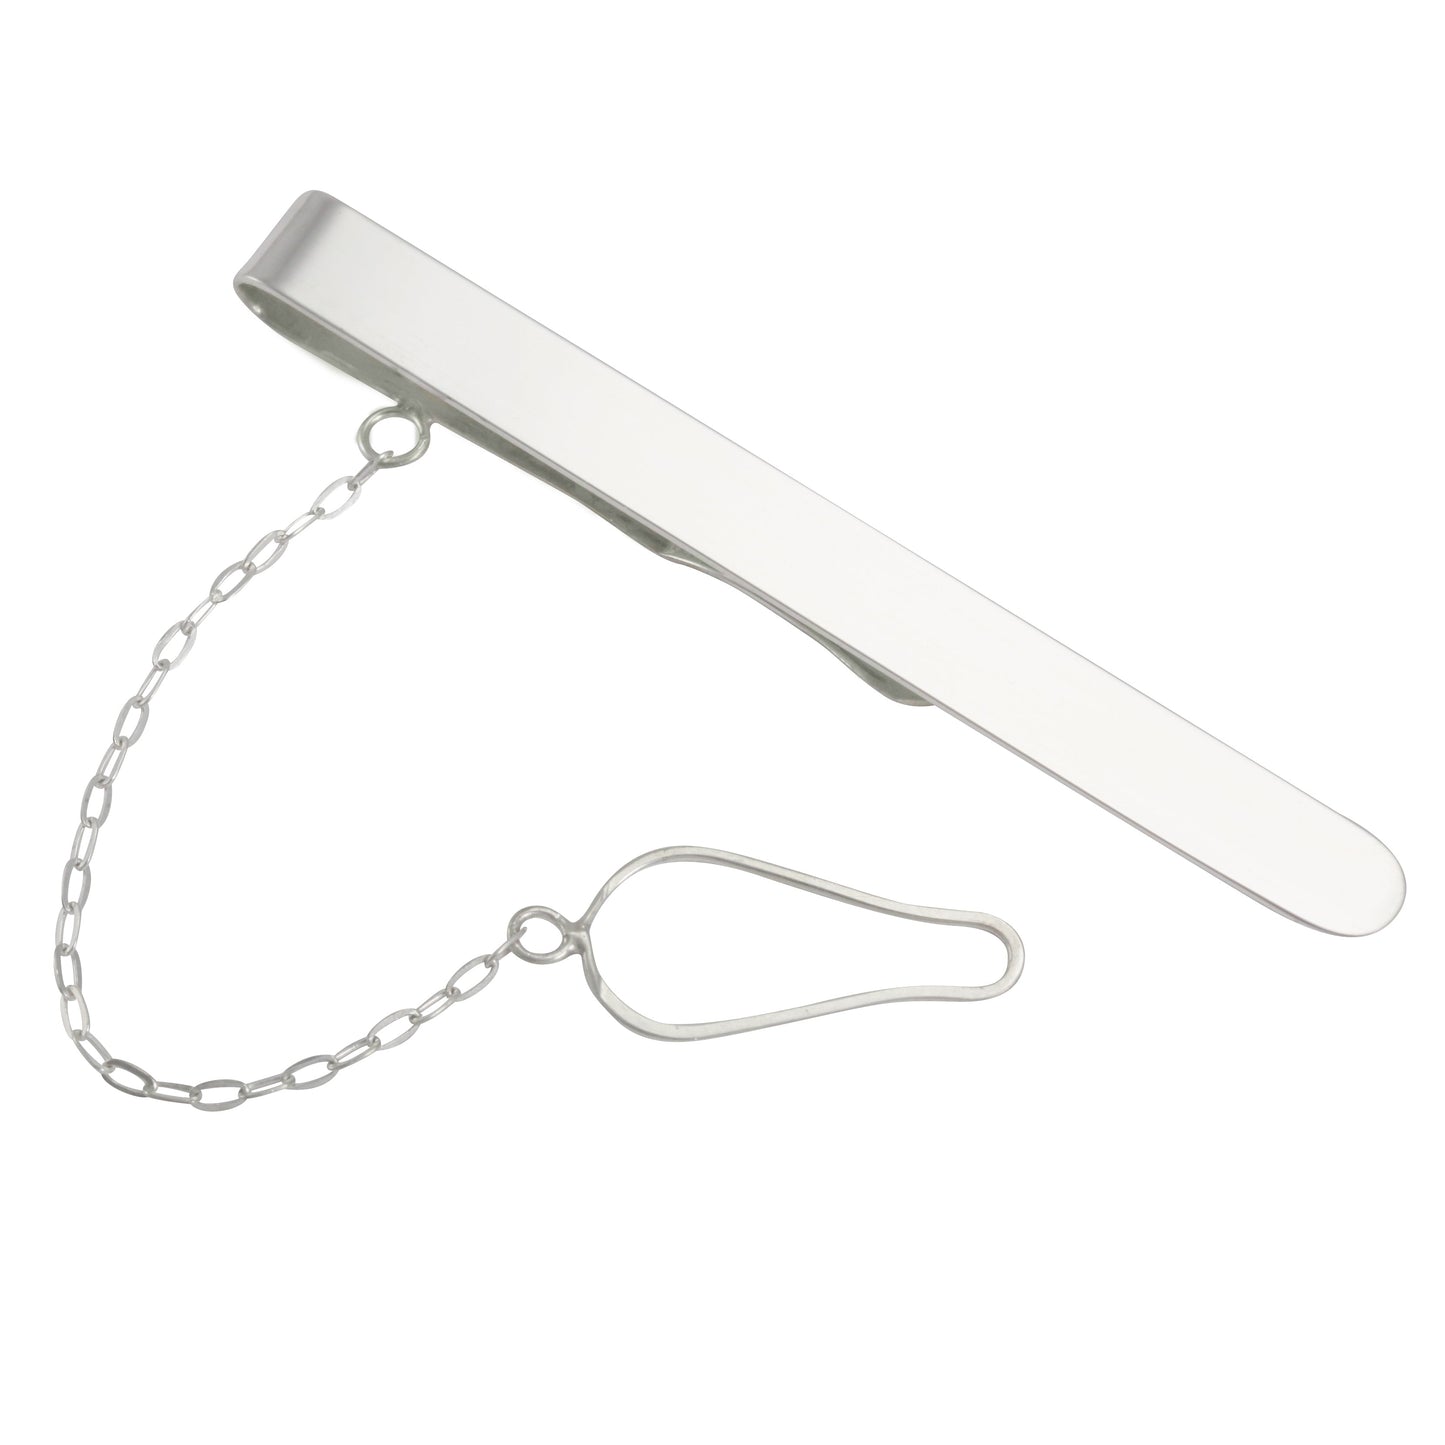 Sterling Silver Classic Tie Slide with Retainer Chain